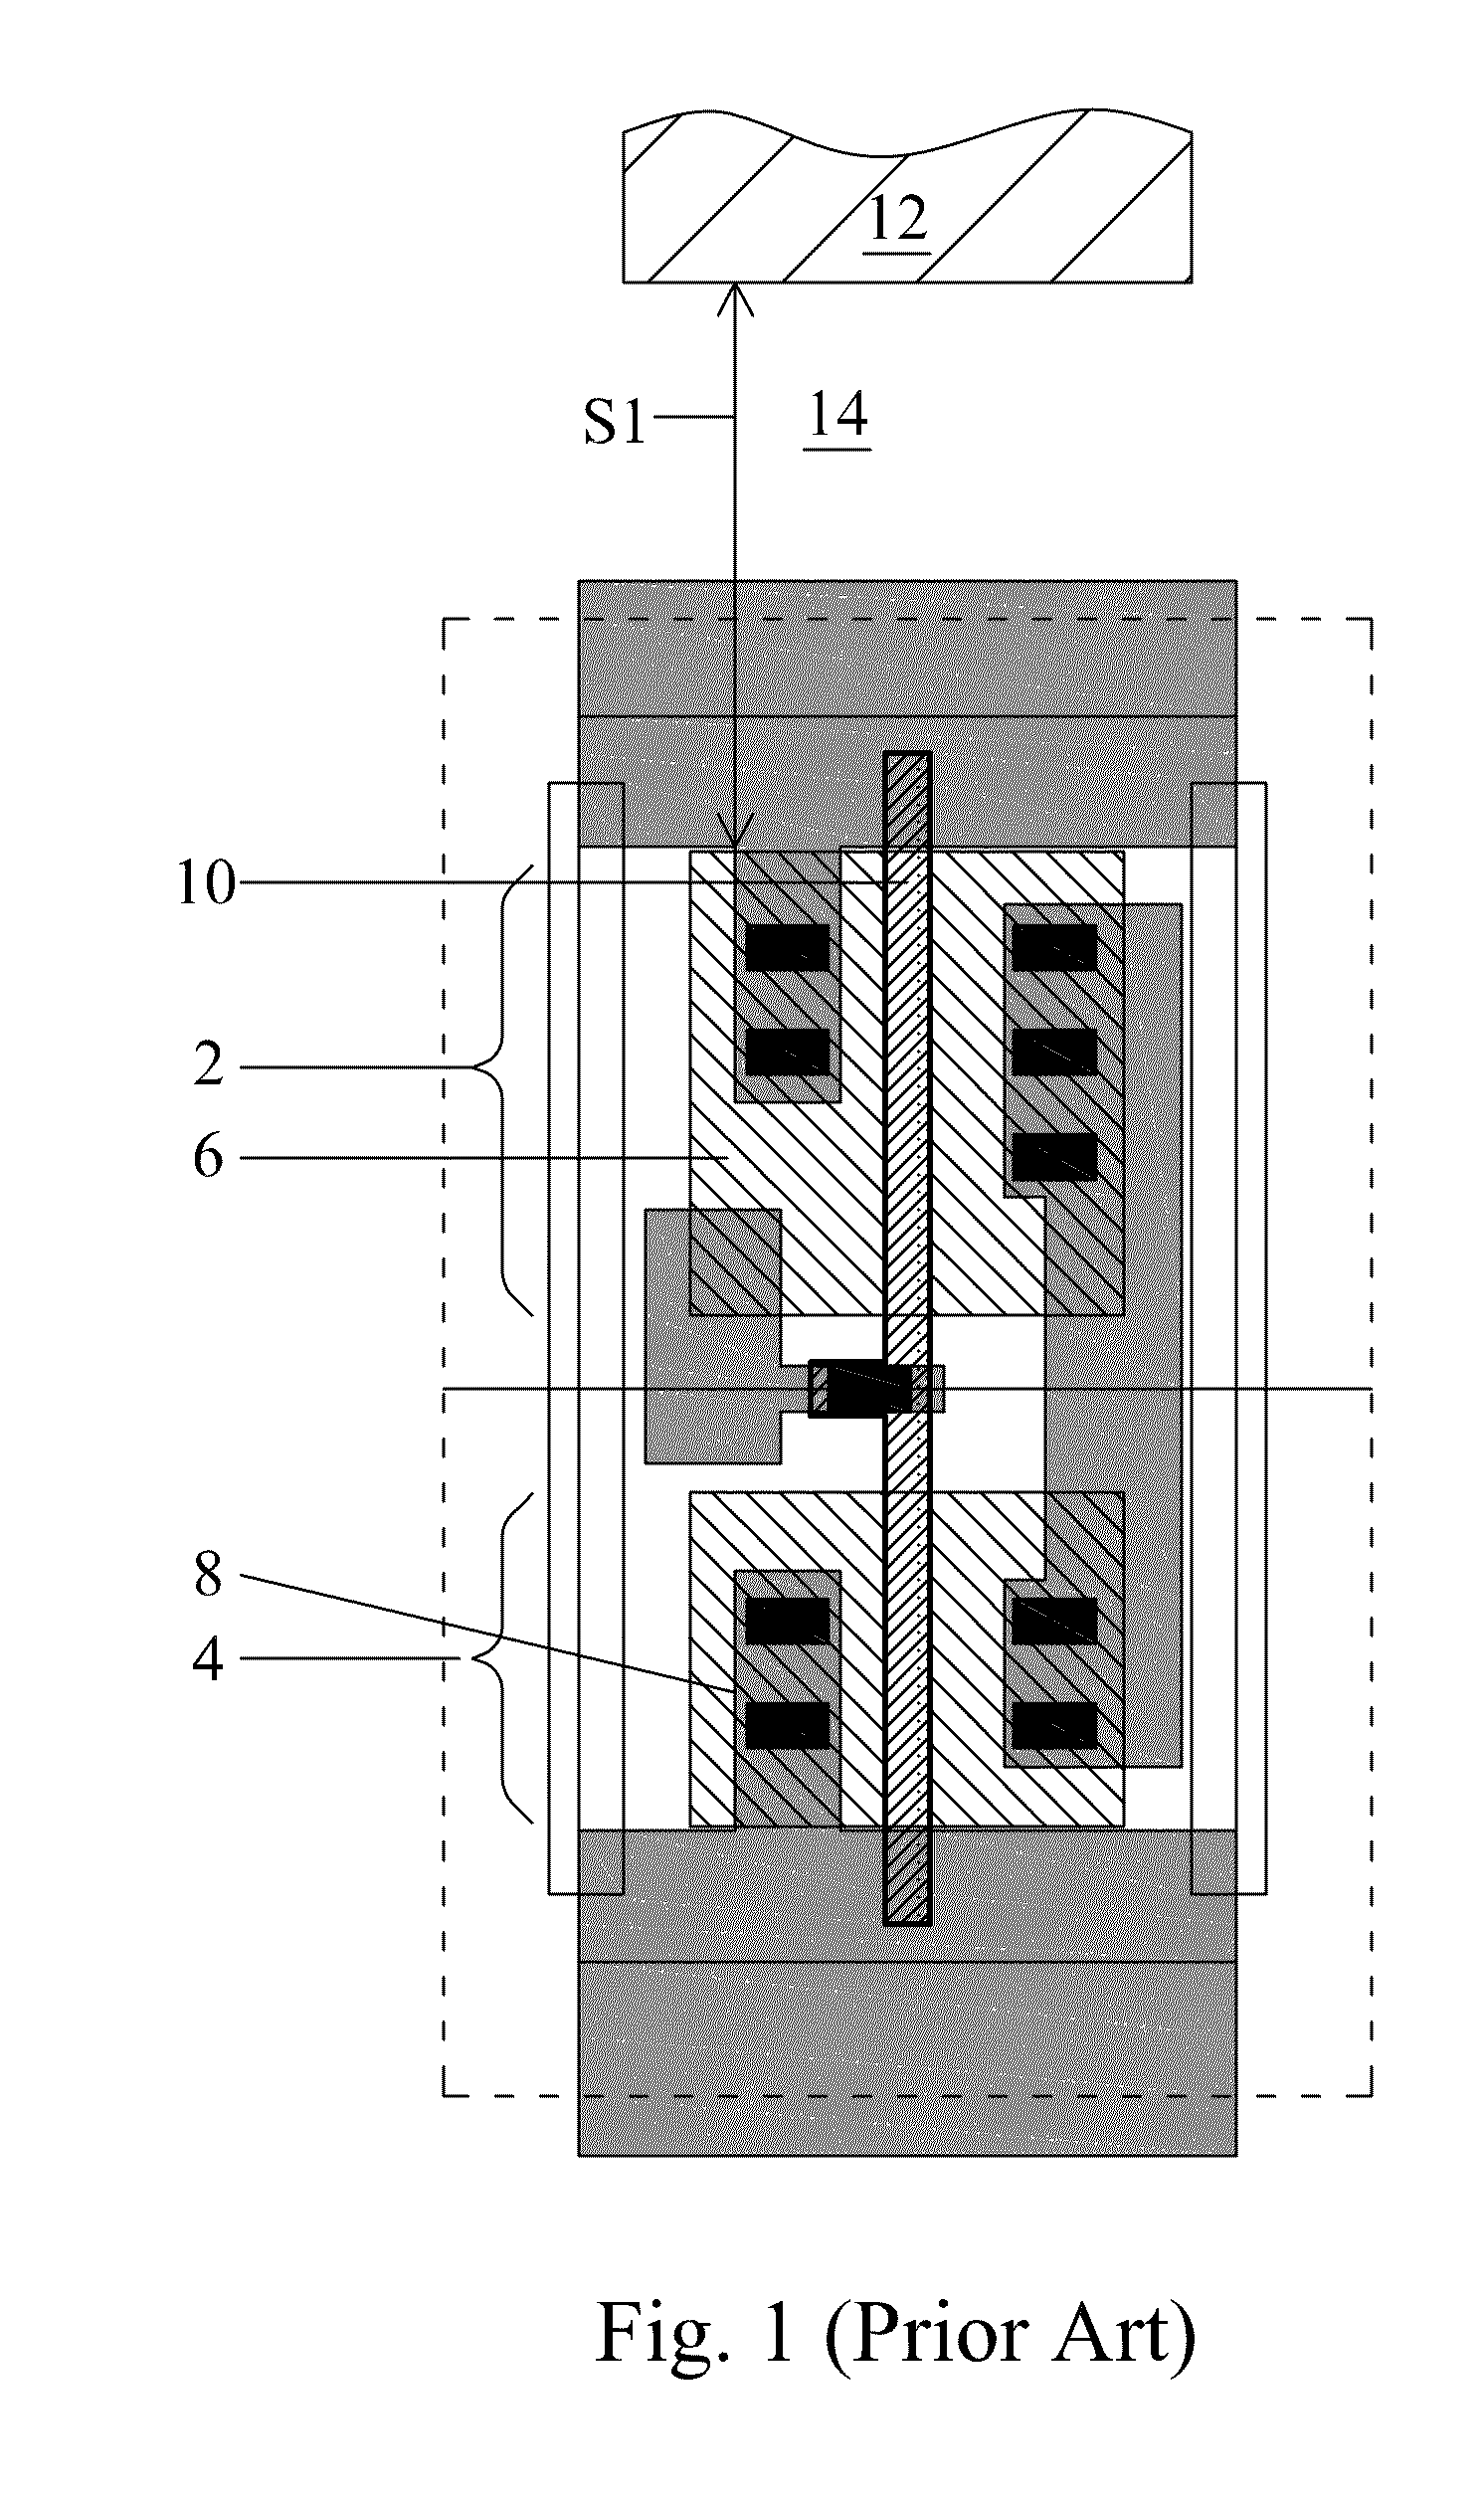 Standard cell without OD space effect in Y-direction